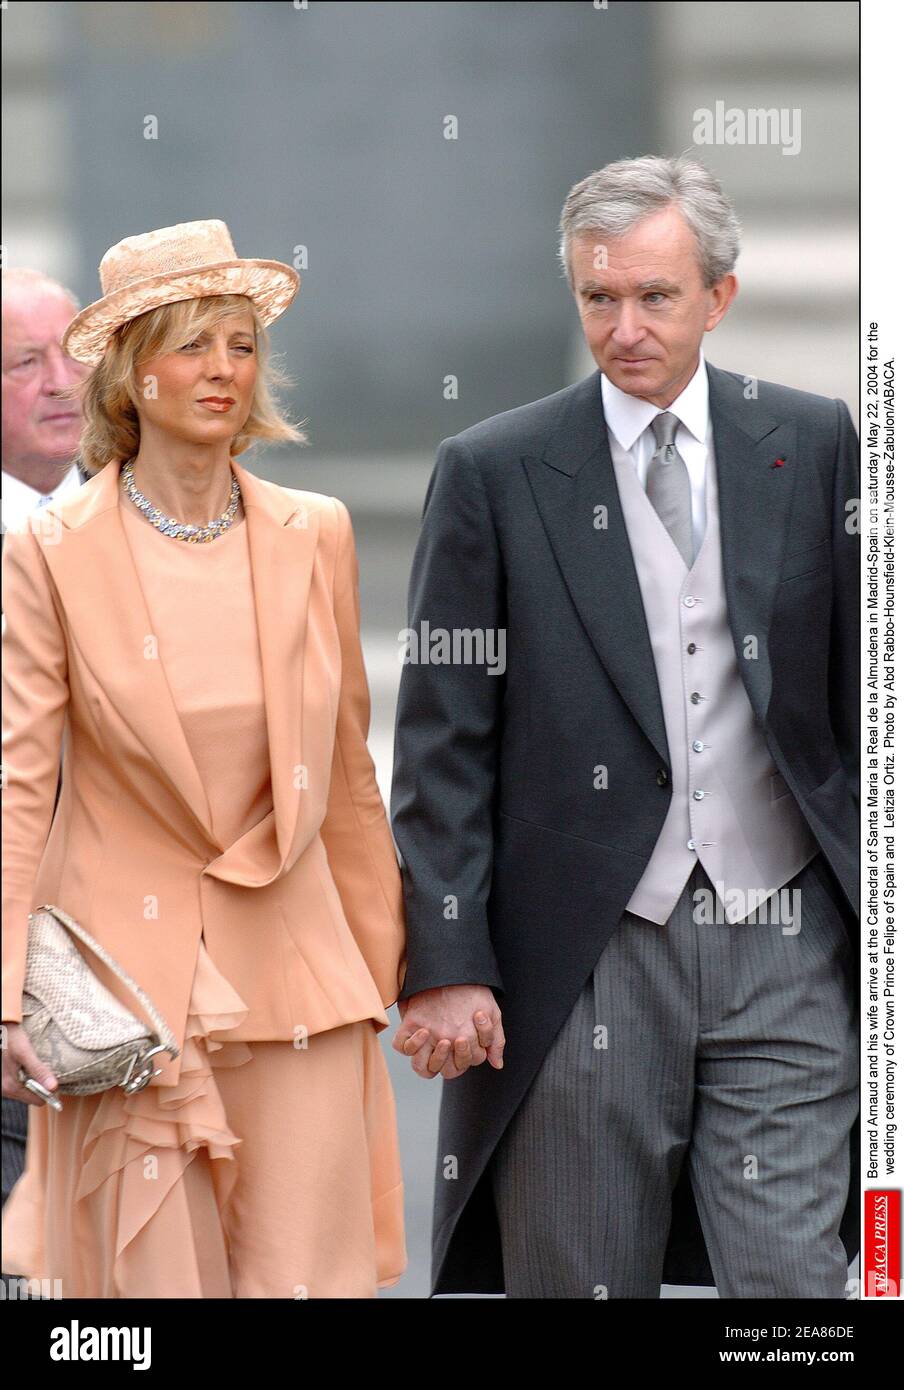 Bernard Arnaud and his wife Helene Mercier Arnault arrive at the Cathedral  of Santa Maria la Real de la Almudena in Madrid-Spain on saturday May 22,  2004 for the wedding ceremony of